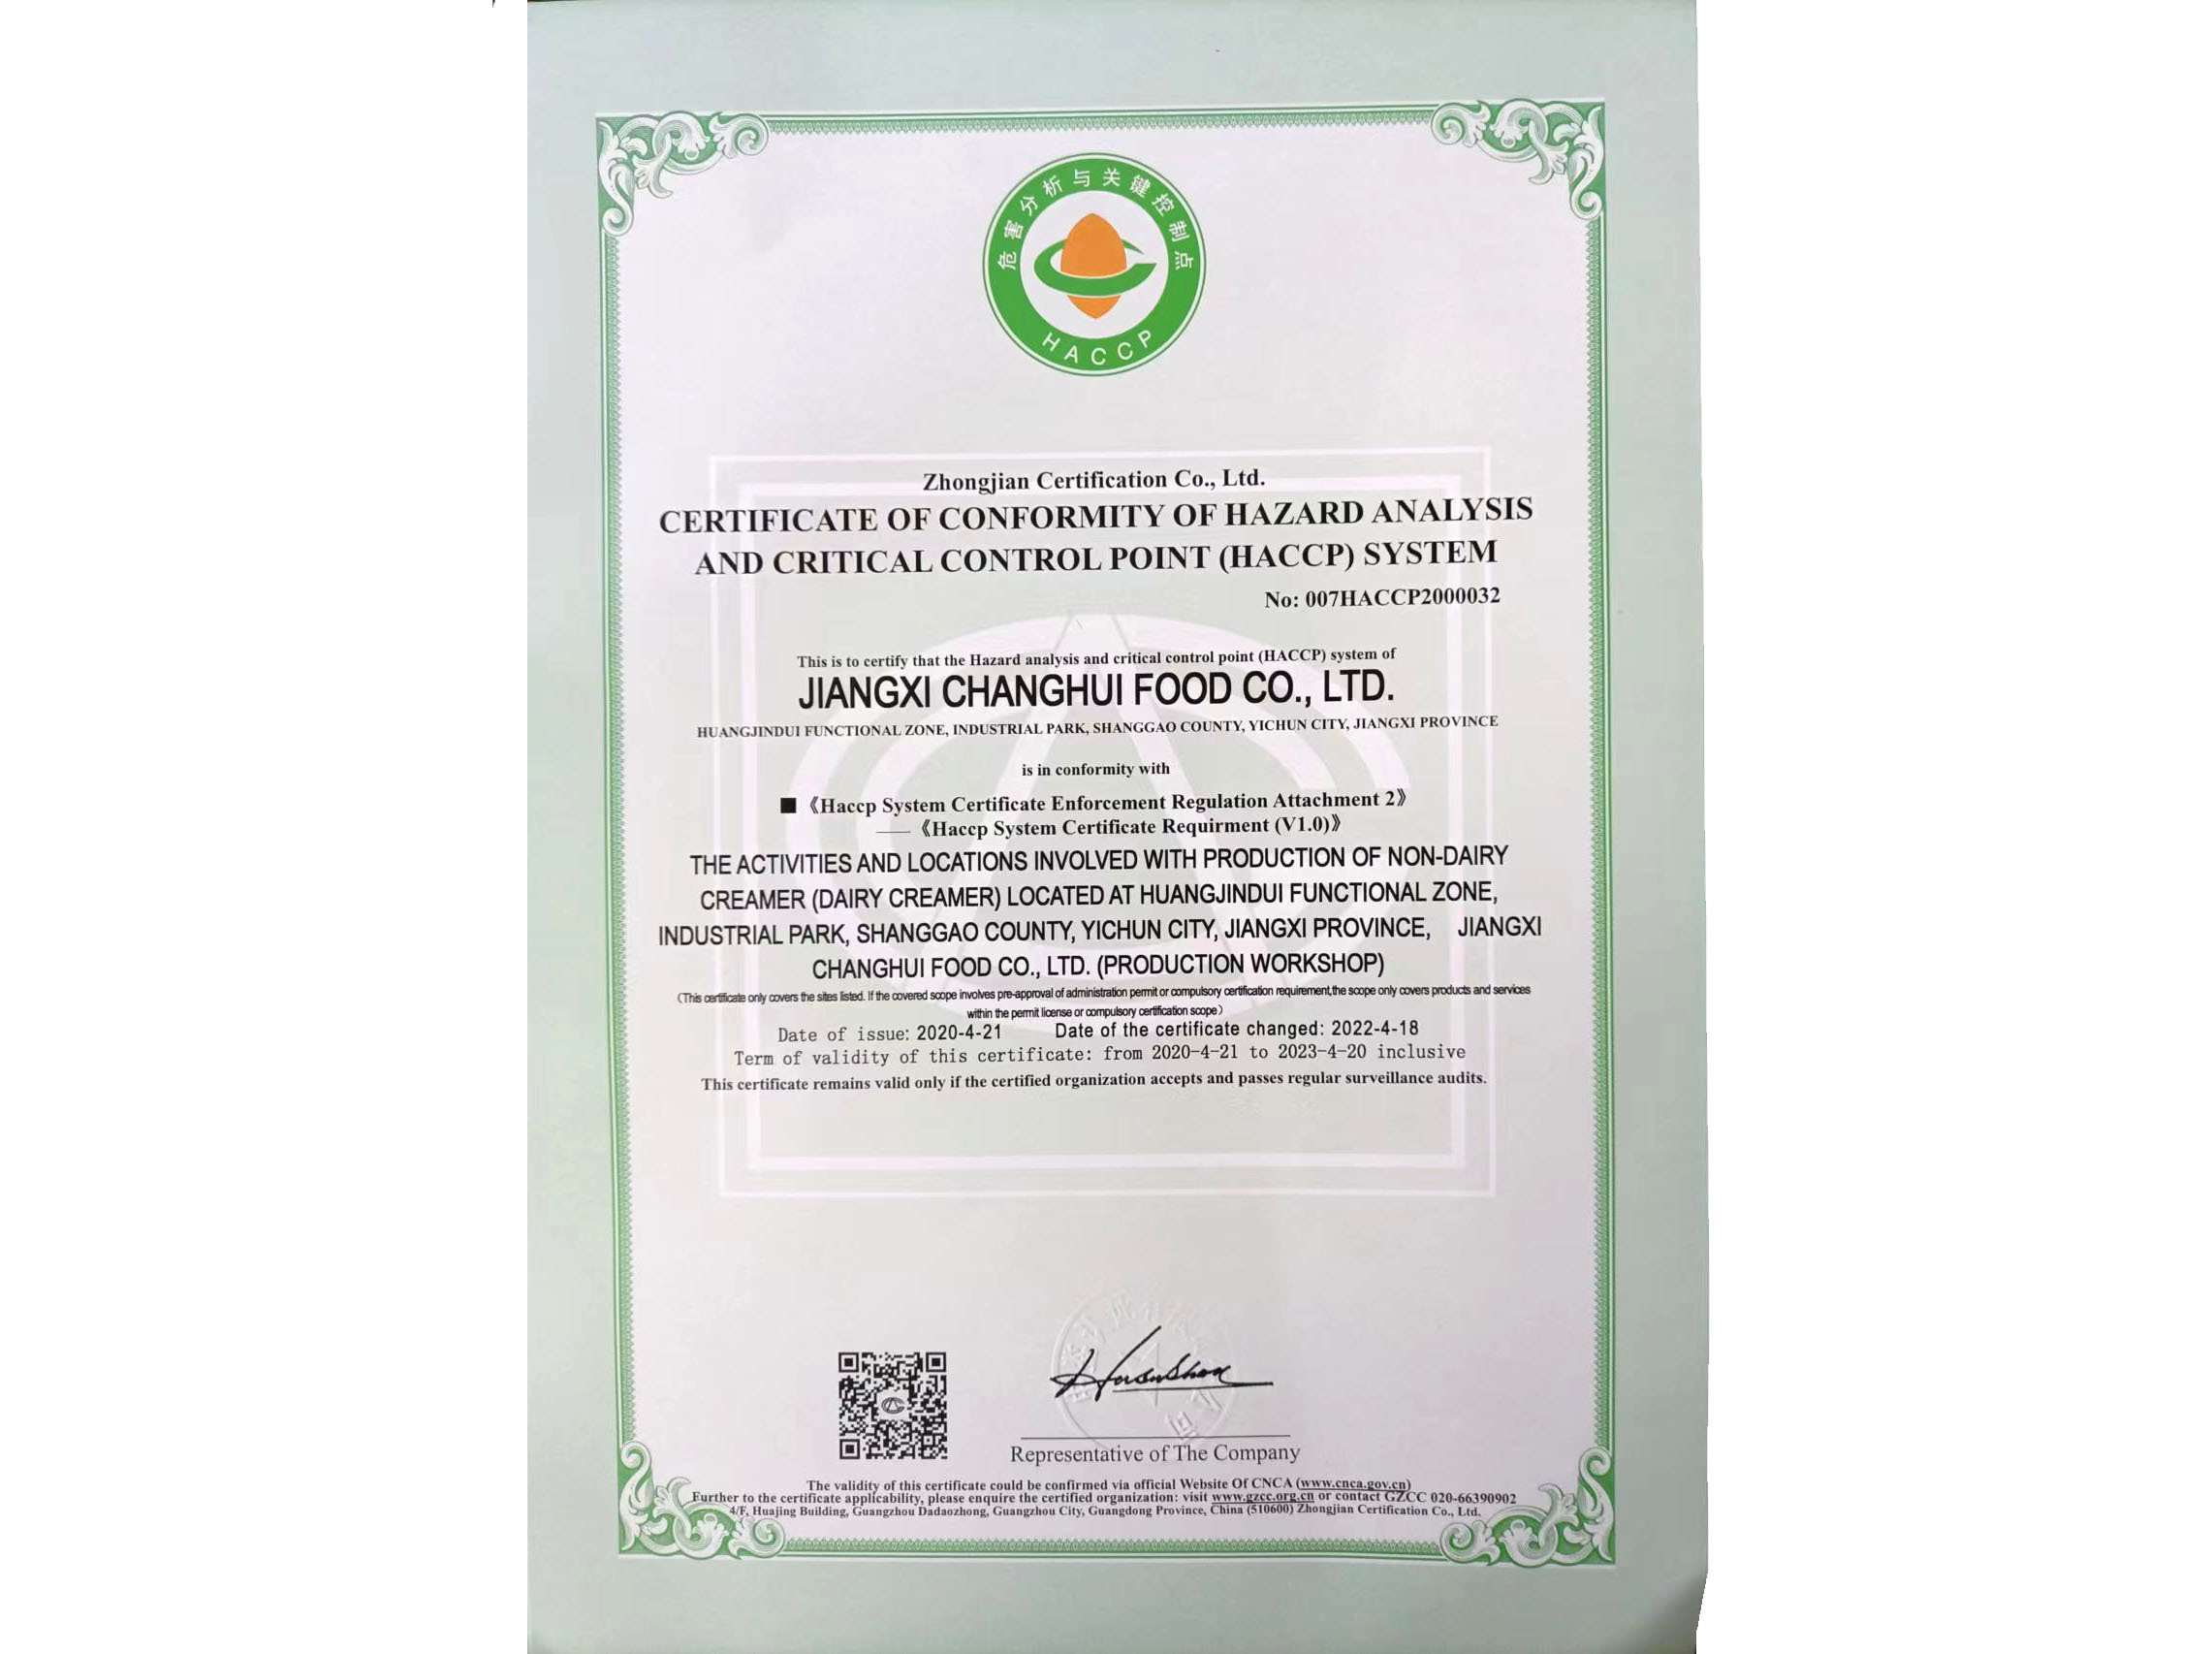 CERTIFICATE OF CONFORMITY OF HAZARD ANALYSIS，AND CRITICAL CONTROL POINT (HACCP) SYSTEM